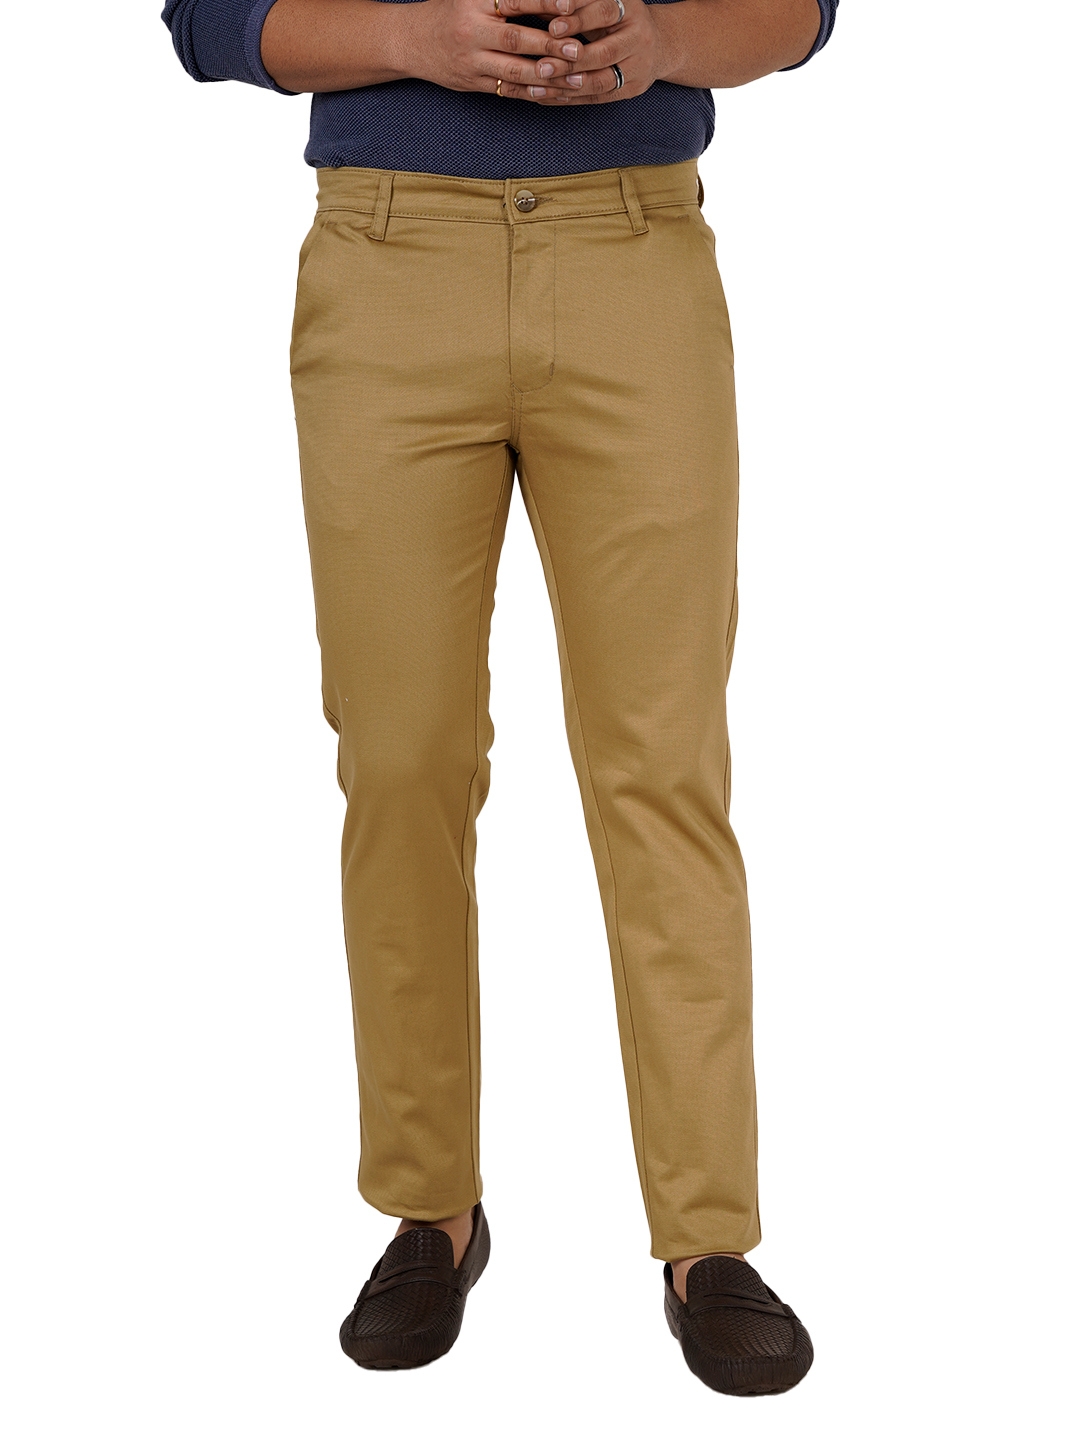 D'cot by Donear Men's Brown Cotton Trousers